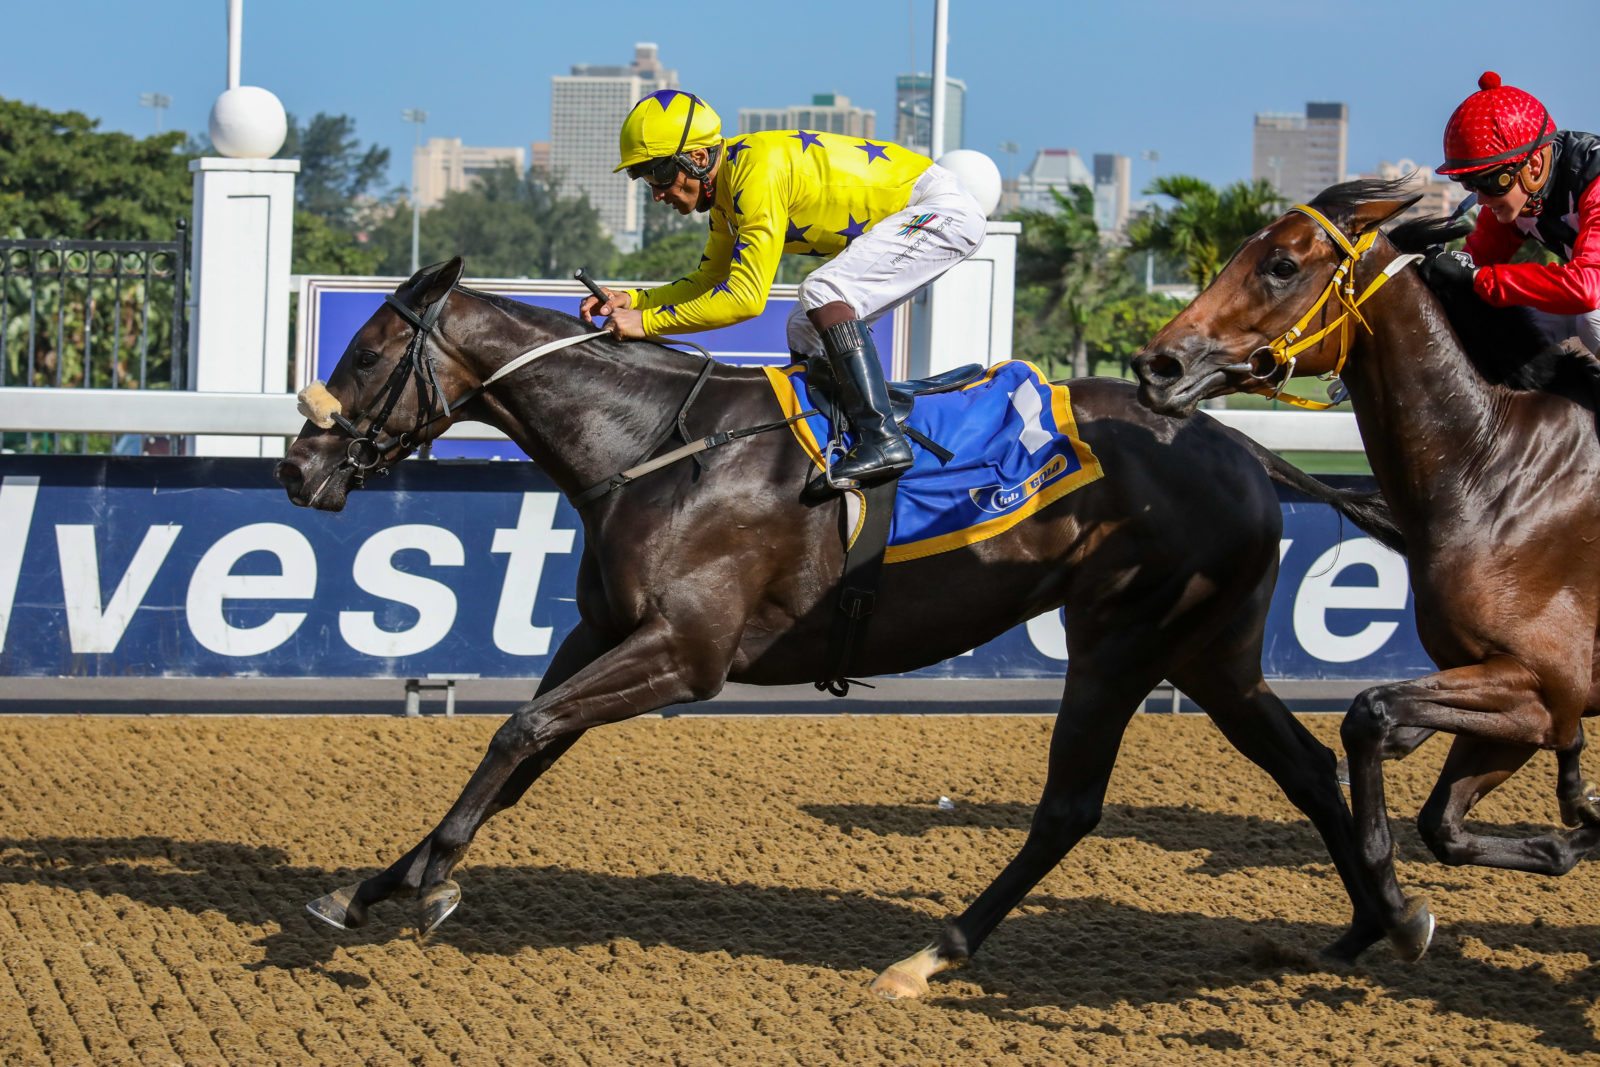 Mocha Rose wins at Hollywoodbets Greyville on the 20th March 2019. Horse racing.